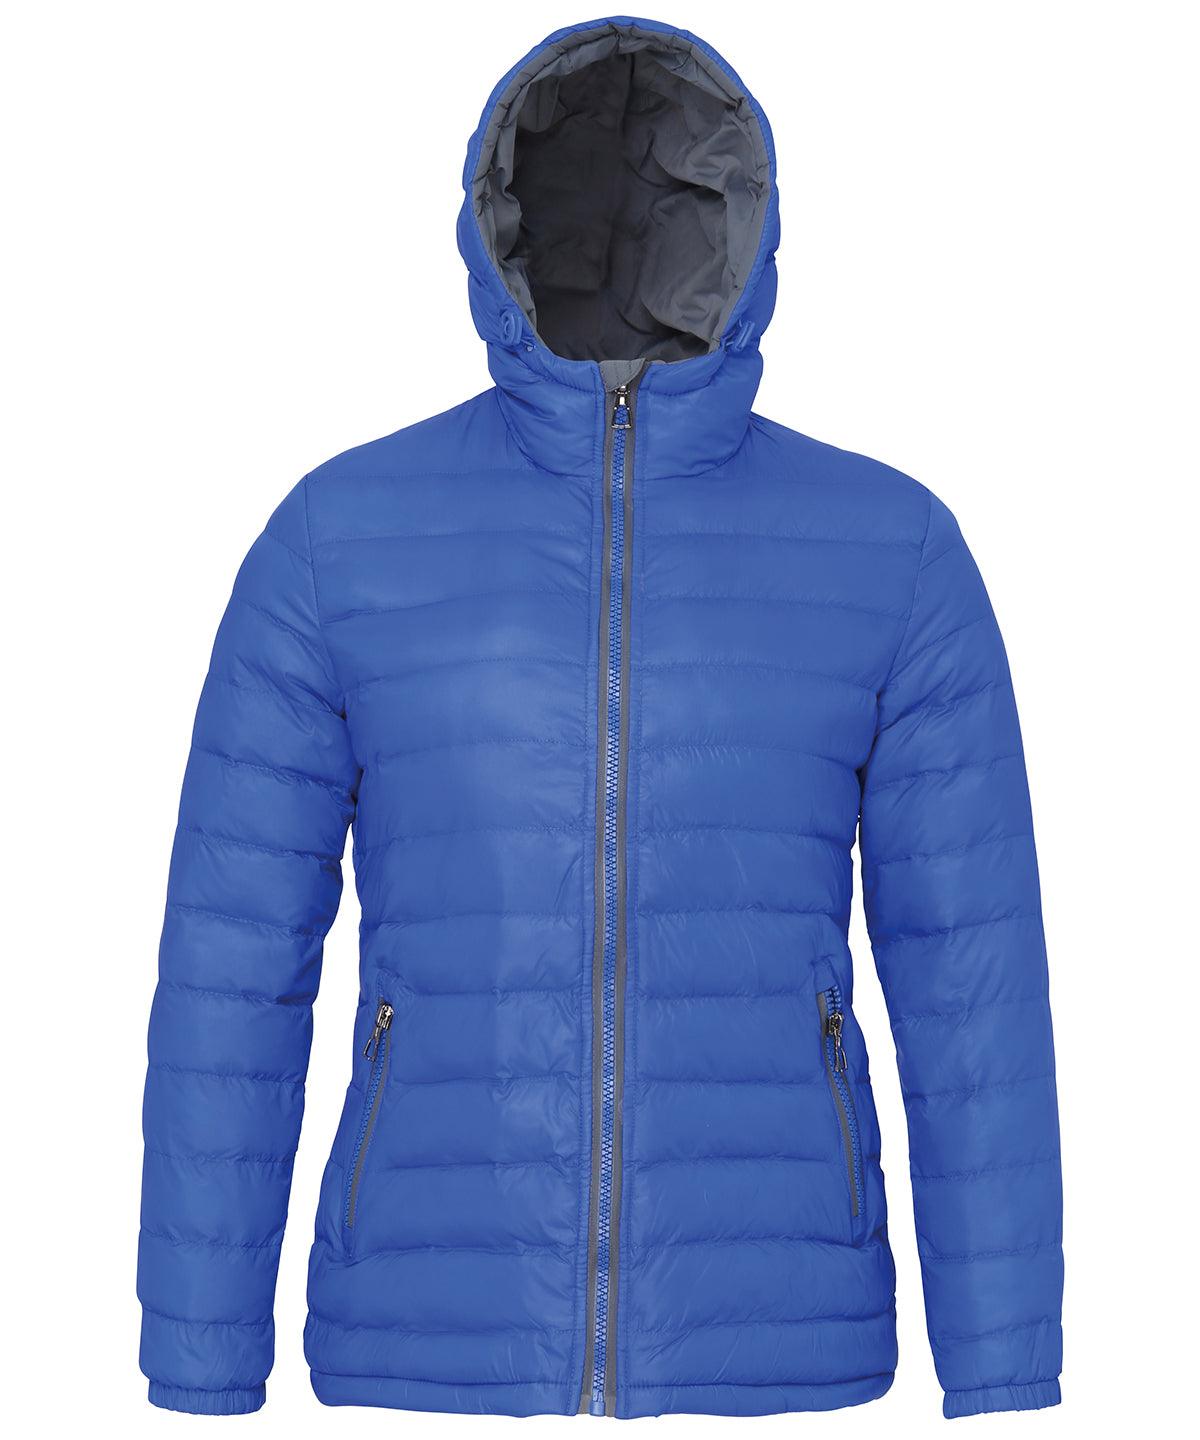 Royal/Grey - Women's padded jacket Jackets 2786 Jackets & Coats, Must Haves, Padded & Insulation Schoolwear Centres